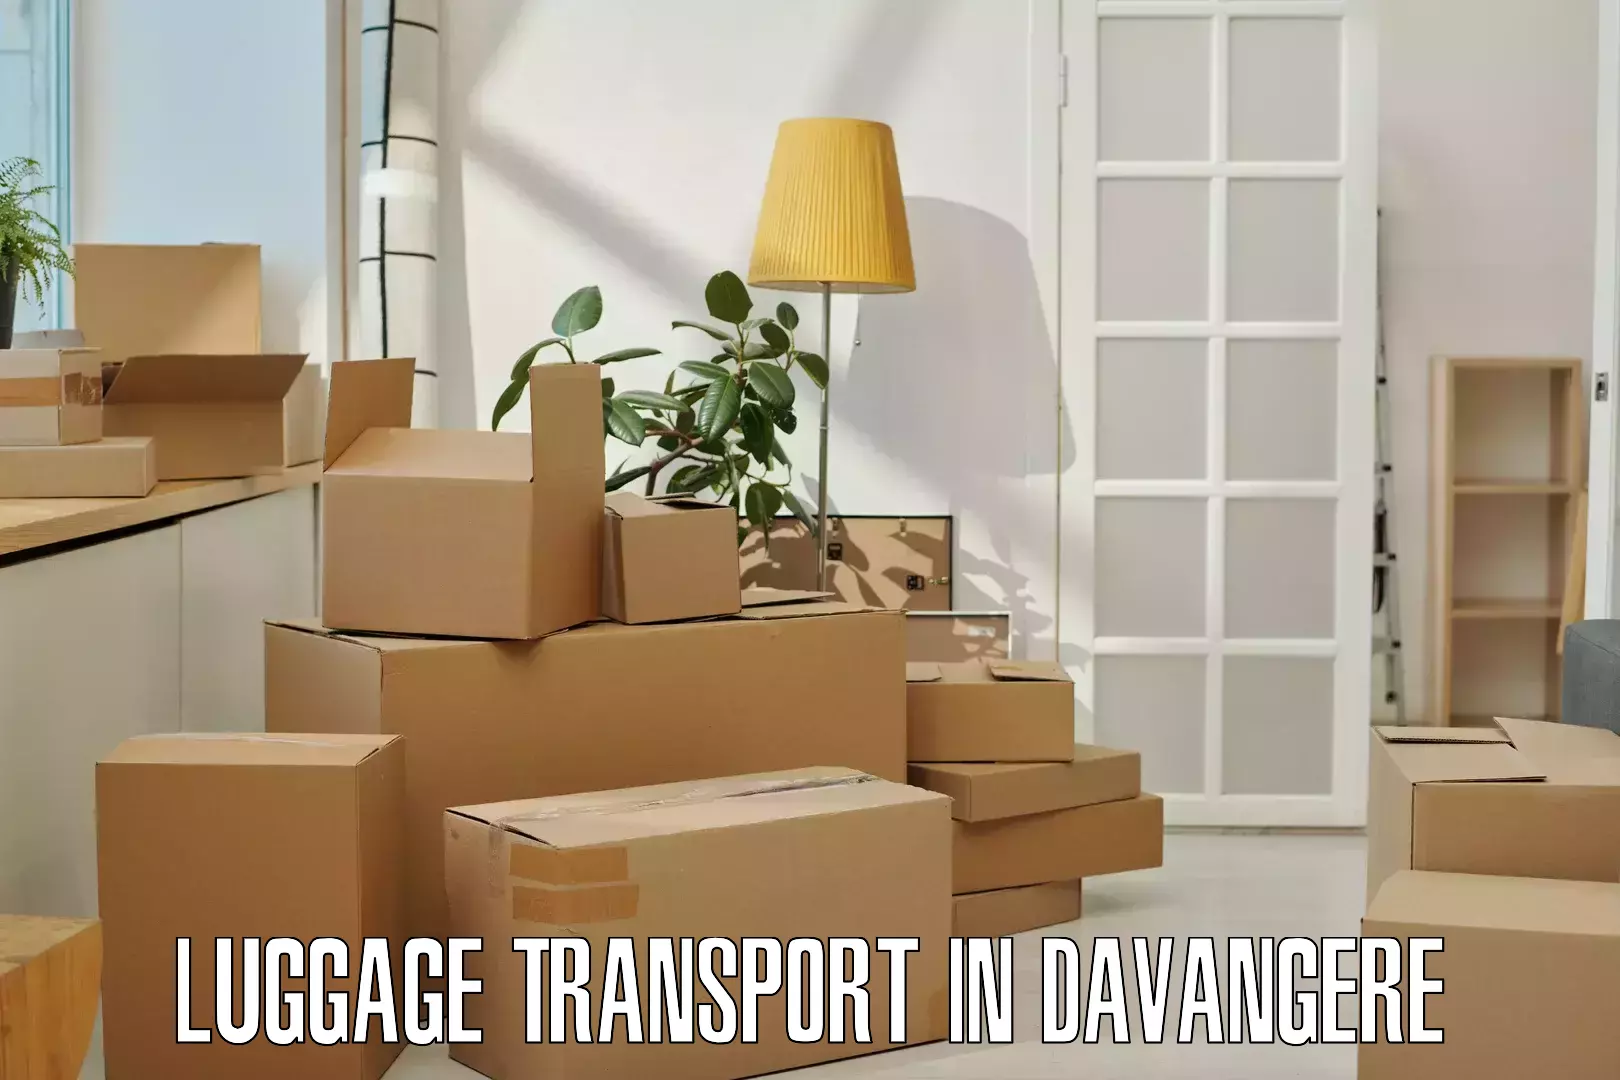 Baggage transport quote in Davangere